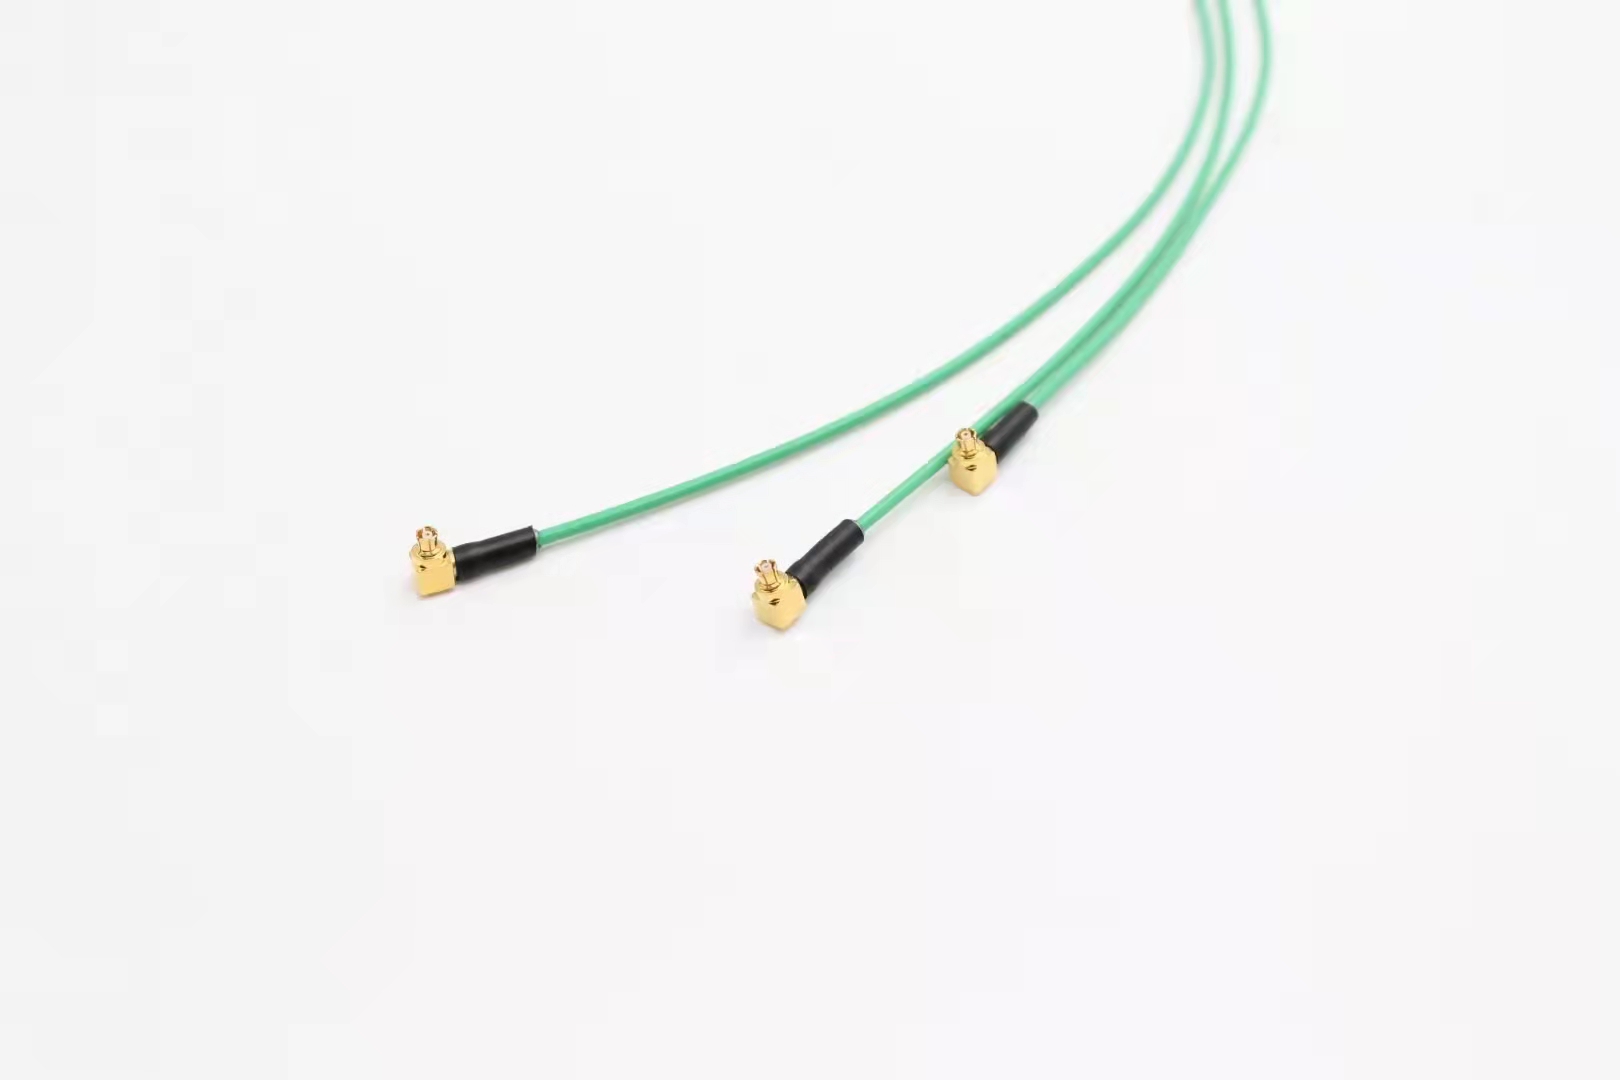 Medical coaxial SMC right angle harness connector